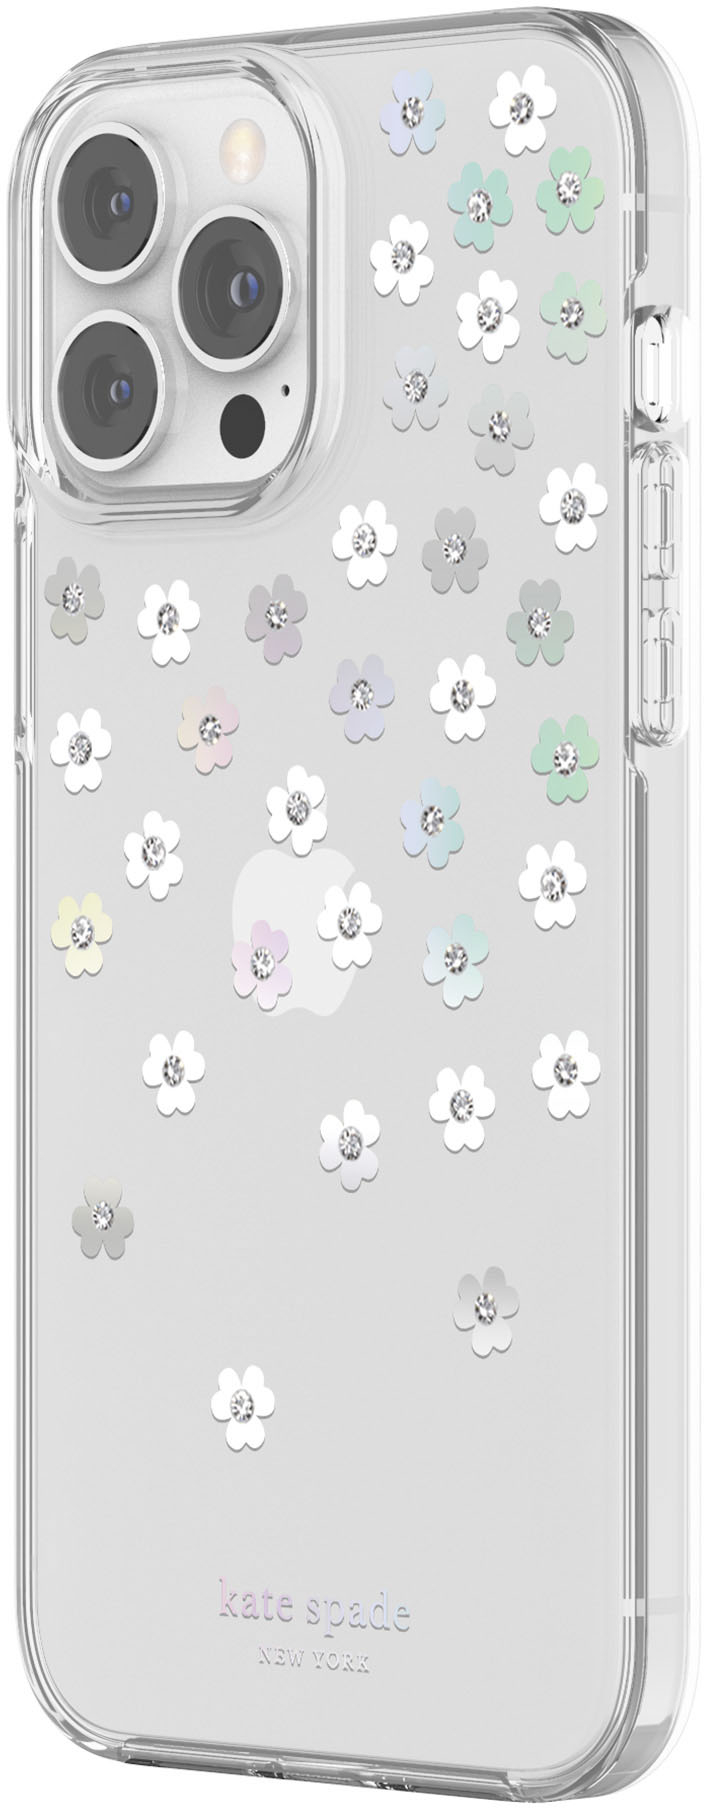 Angle View: kate spade new york - Protective Hardshell Case for iPhone 13/12 Pro Max - Scatterred Flowers